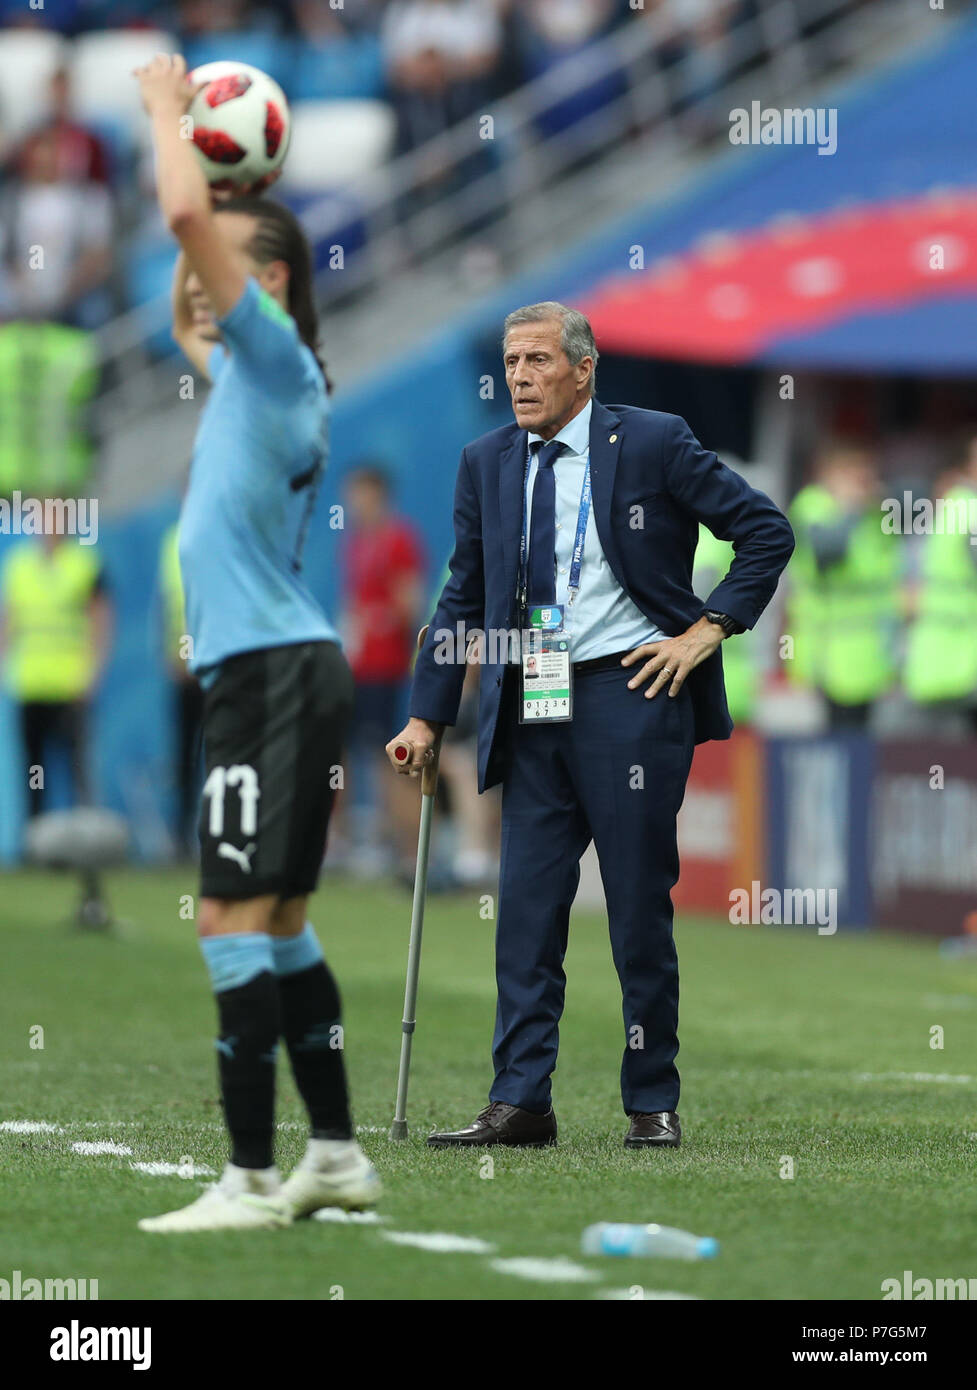 Nizhny Novgorod, Russia. 6th July, 2018. Head coach Oscar Tabarez (R) of Uruguay is seen during the 2018 FIFA World Cup quarter-final match between Uruguay and France in Nizhny Novgorod, Russia, July 6, 2018. France won 2-0 and advanced to the semi-finals. Credit: Fei Maohua/Xinhua/Alamy Live News Stock Photo